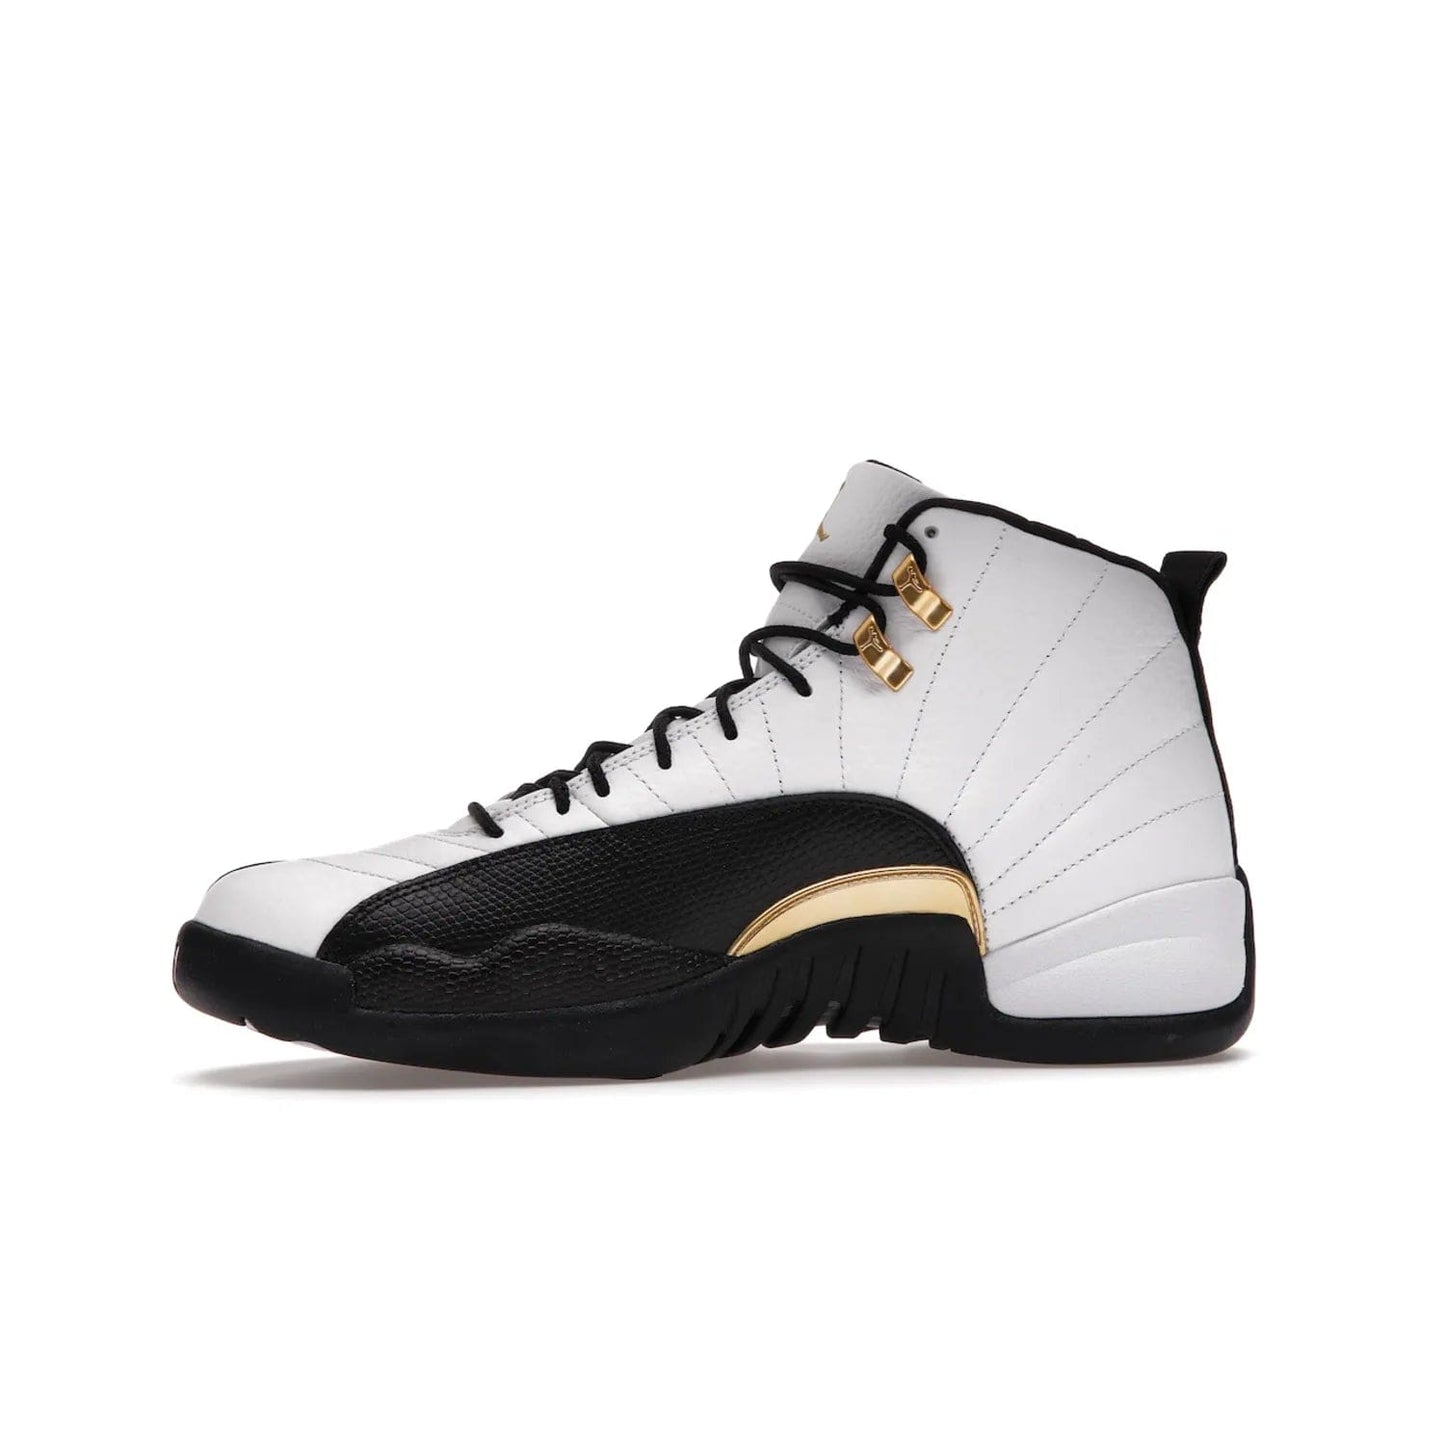 Jordan 12 Retro Royalty Taxi - Image 18 - Only at www.BallersClubKickz.com - Make a statement with the Air Jordan 12 Retro Royalty Taxi. Woven heel tag, gold plaquet, white tumbled leather upper plus a black toe wrap, make this modern take on the classic a must-have. Available in November 2021.